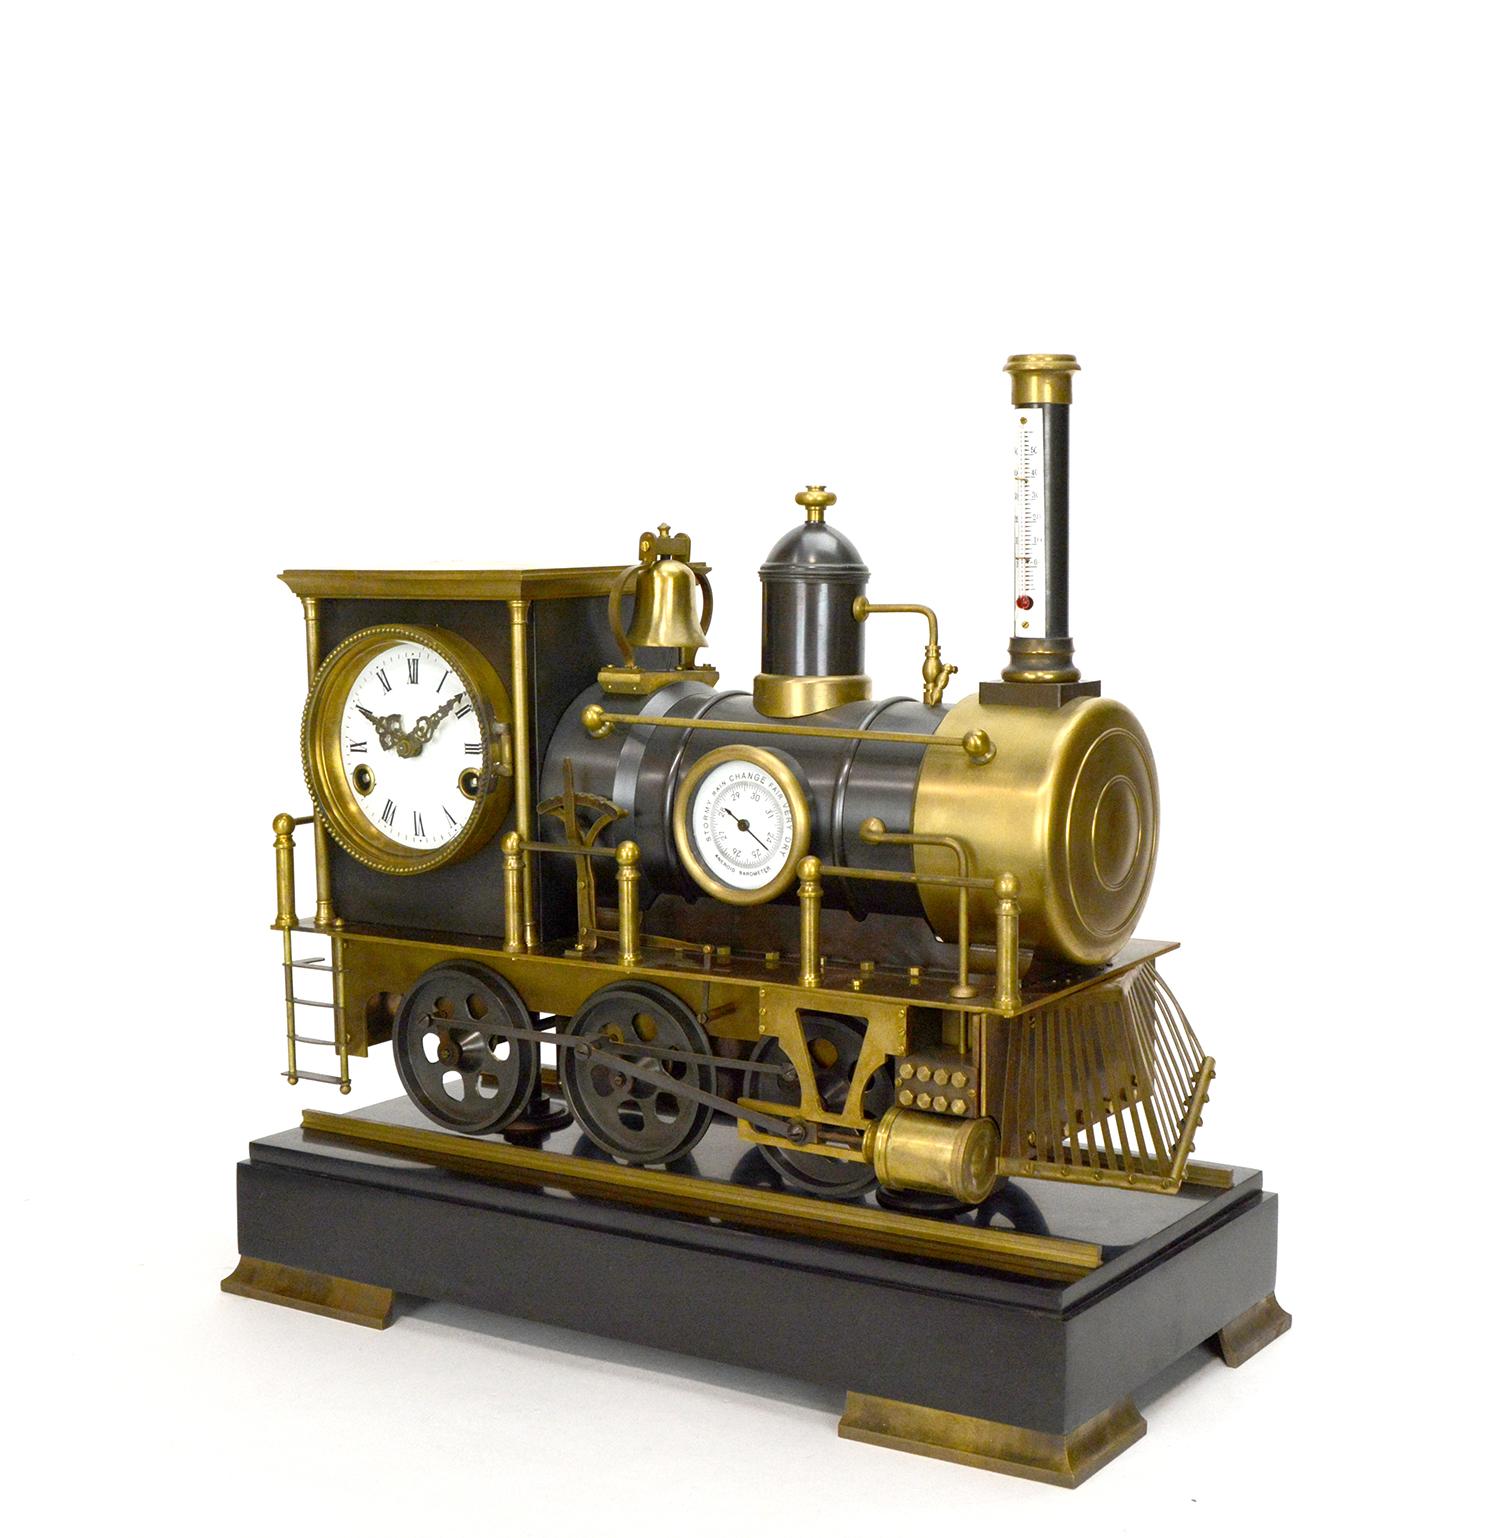 Here we have a wonderful example of the industrial series popular in French horology. When the animation movement is wound the train’s wheels and linkages spin, triggered by the hourly striking. The gilt and painted bronze case is in the form of a